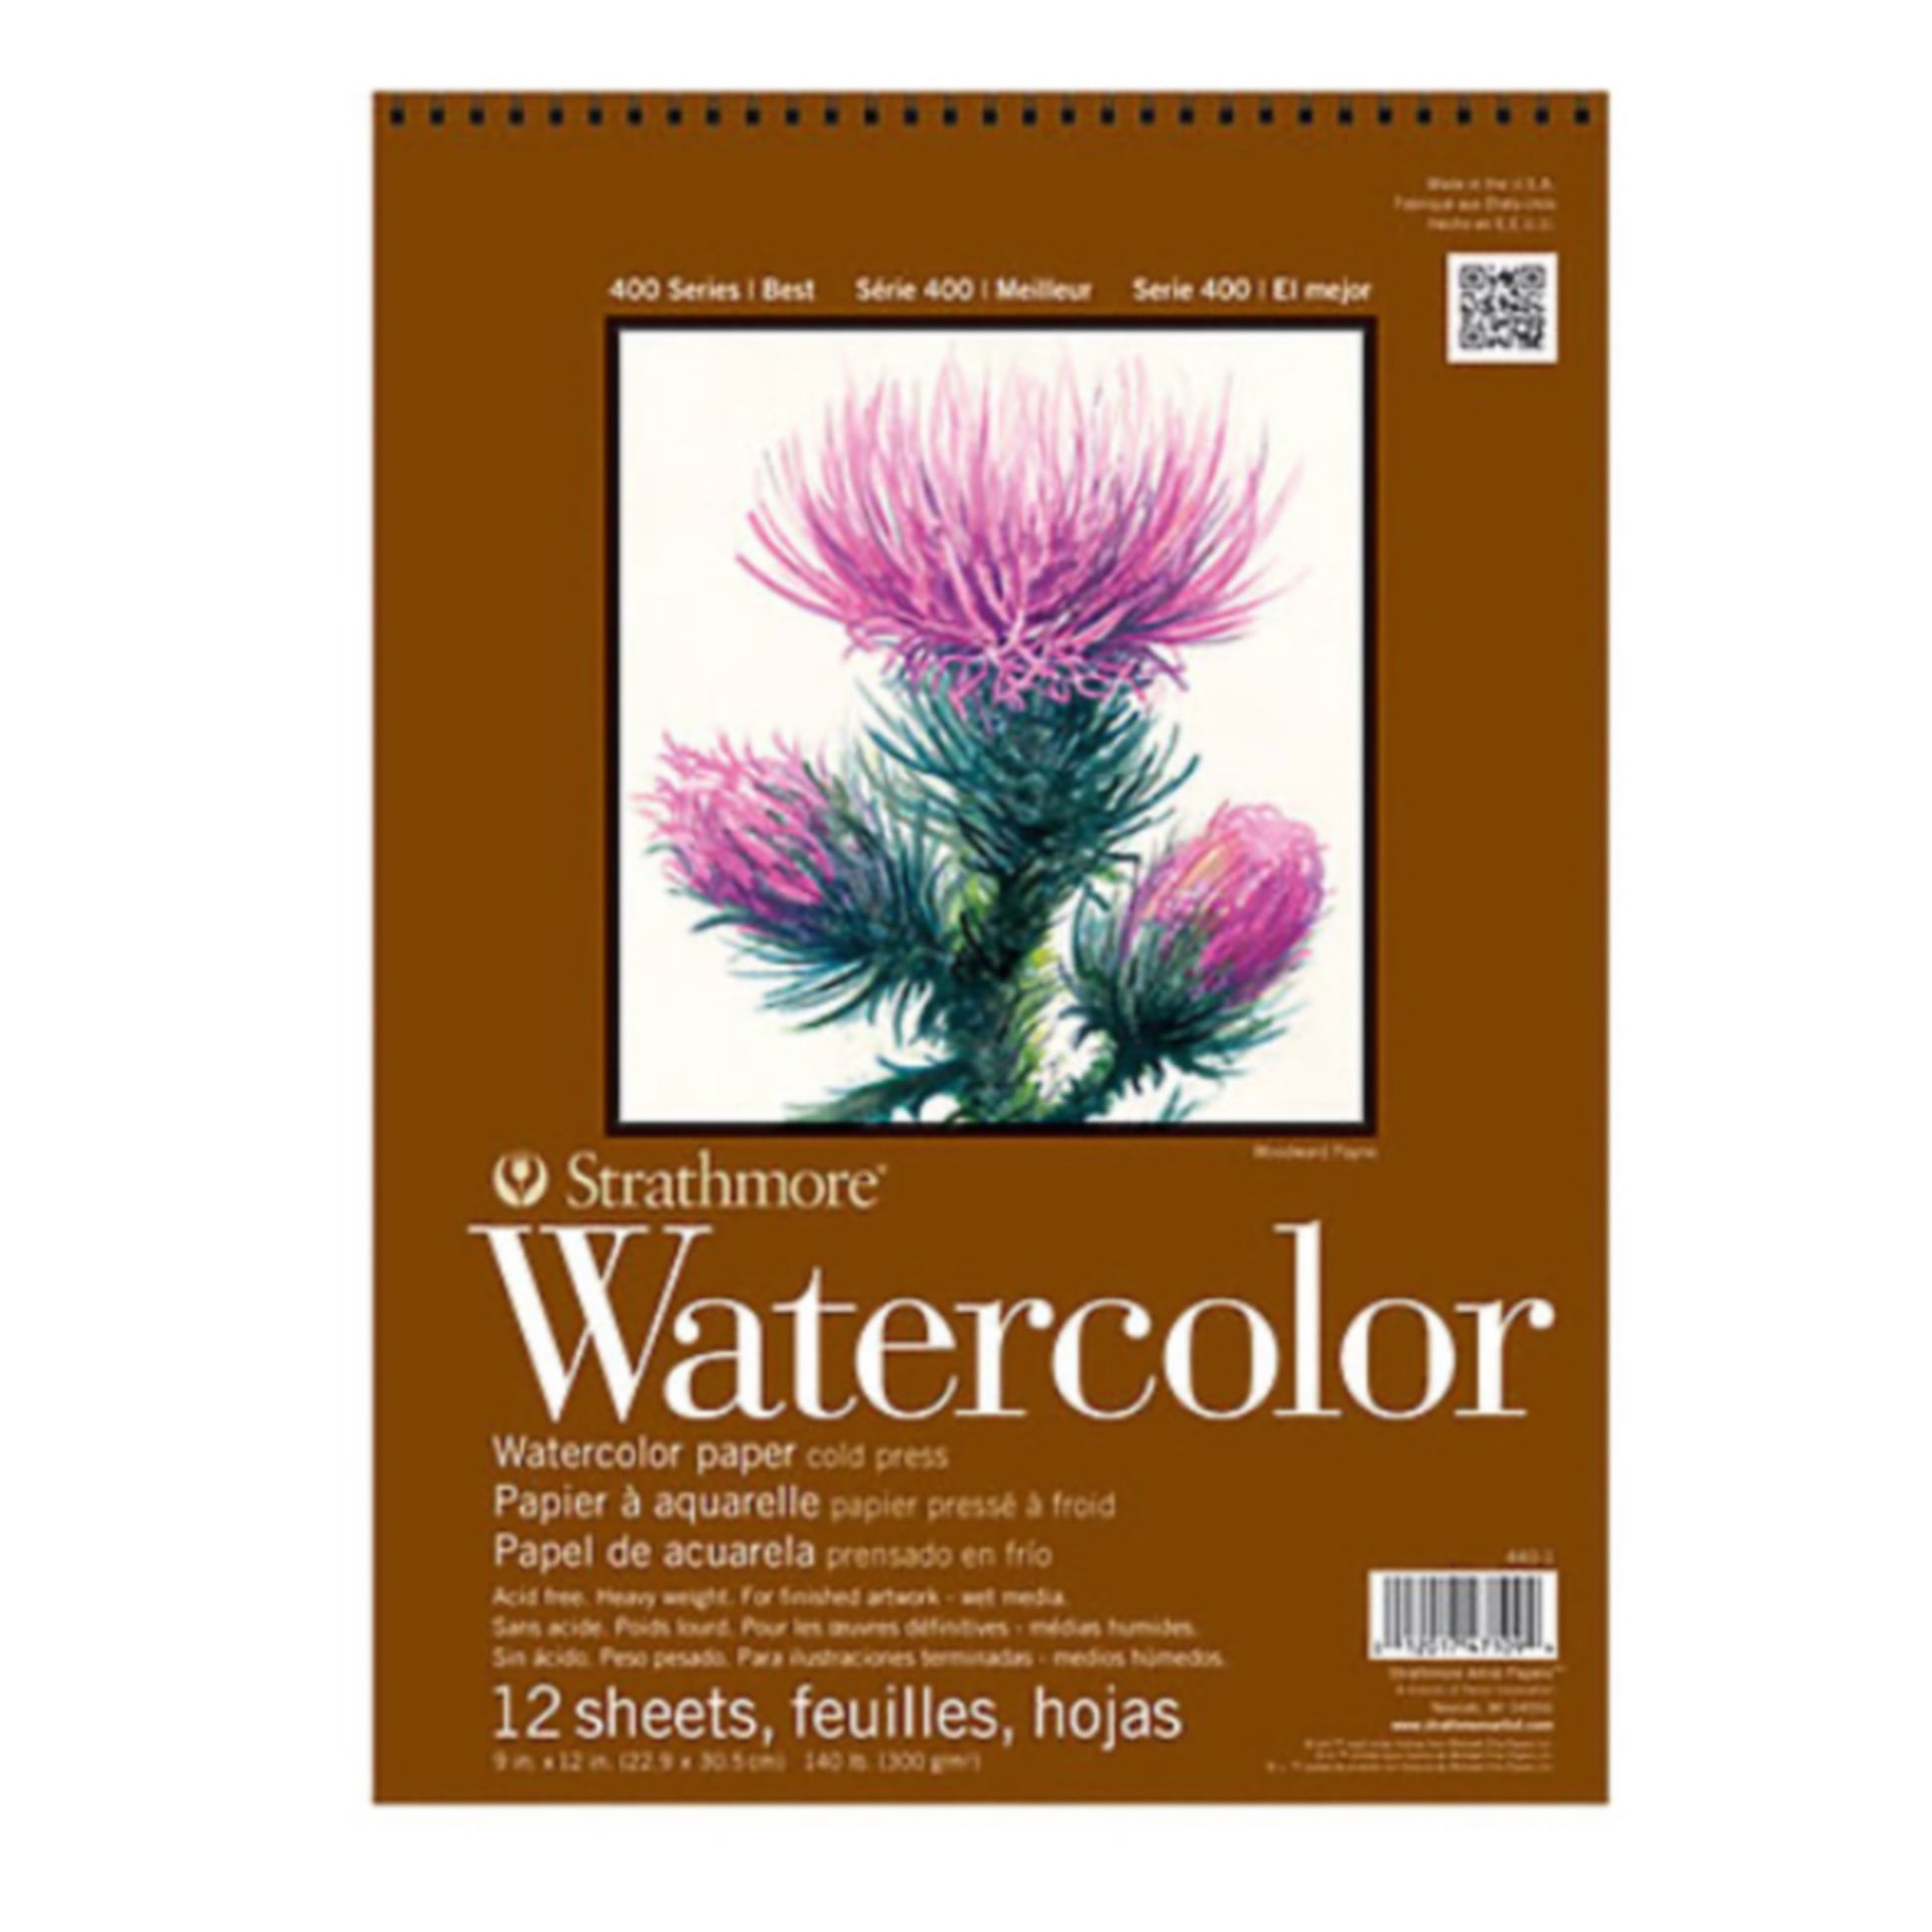 Strathmore 400 Series Watercolor Pad - 11 x 15 inches - by Strathmore - K. A. Artist Shop